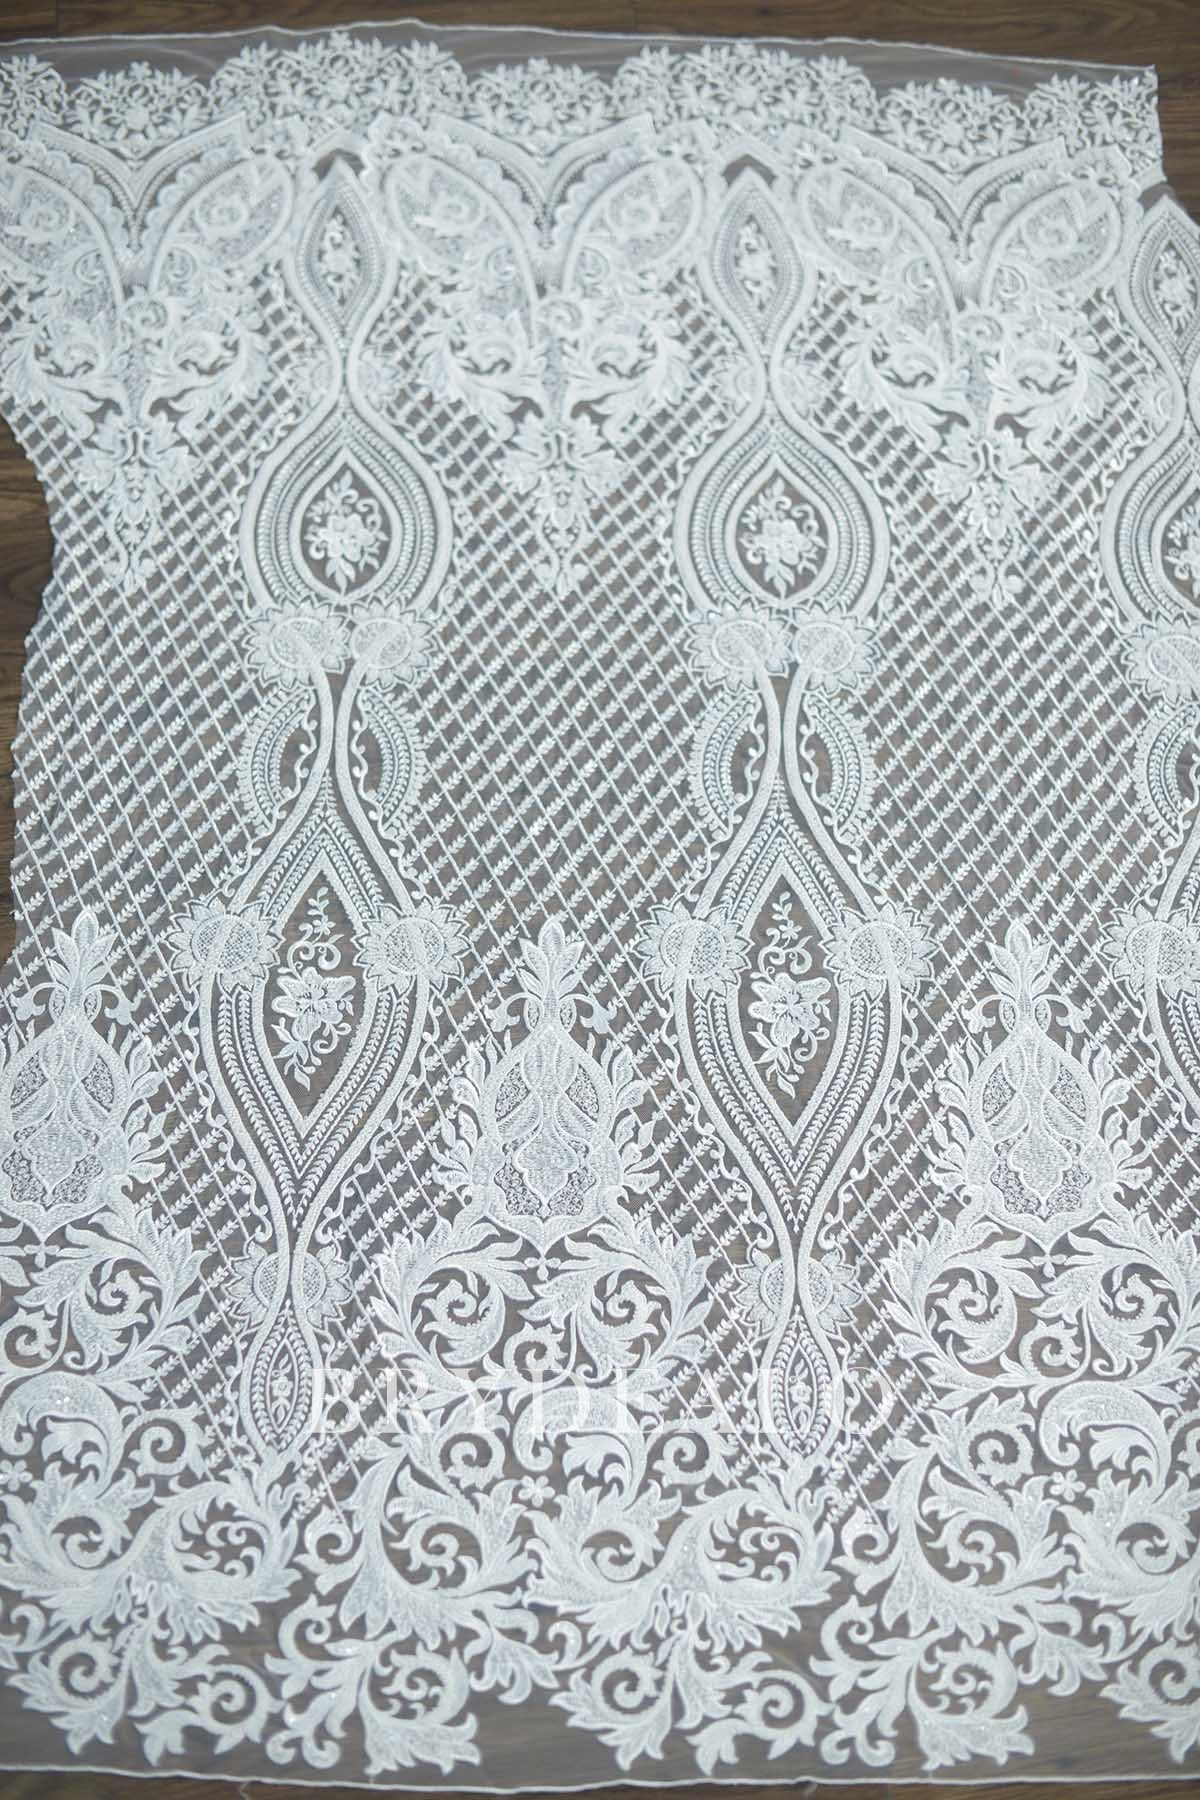 Unique Patterned Heavy Beaded Bridal Lace Fabric